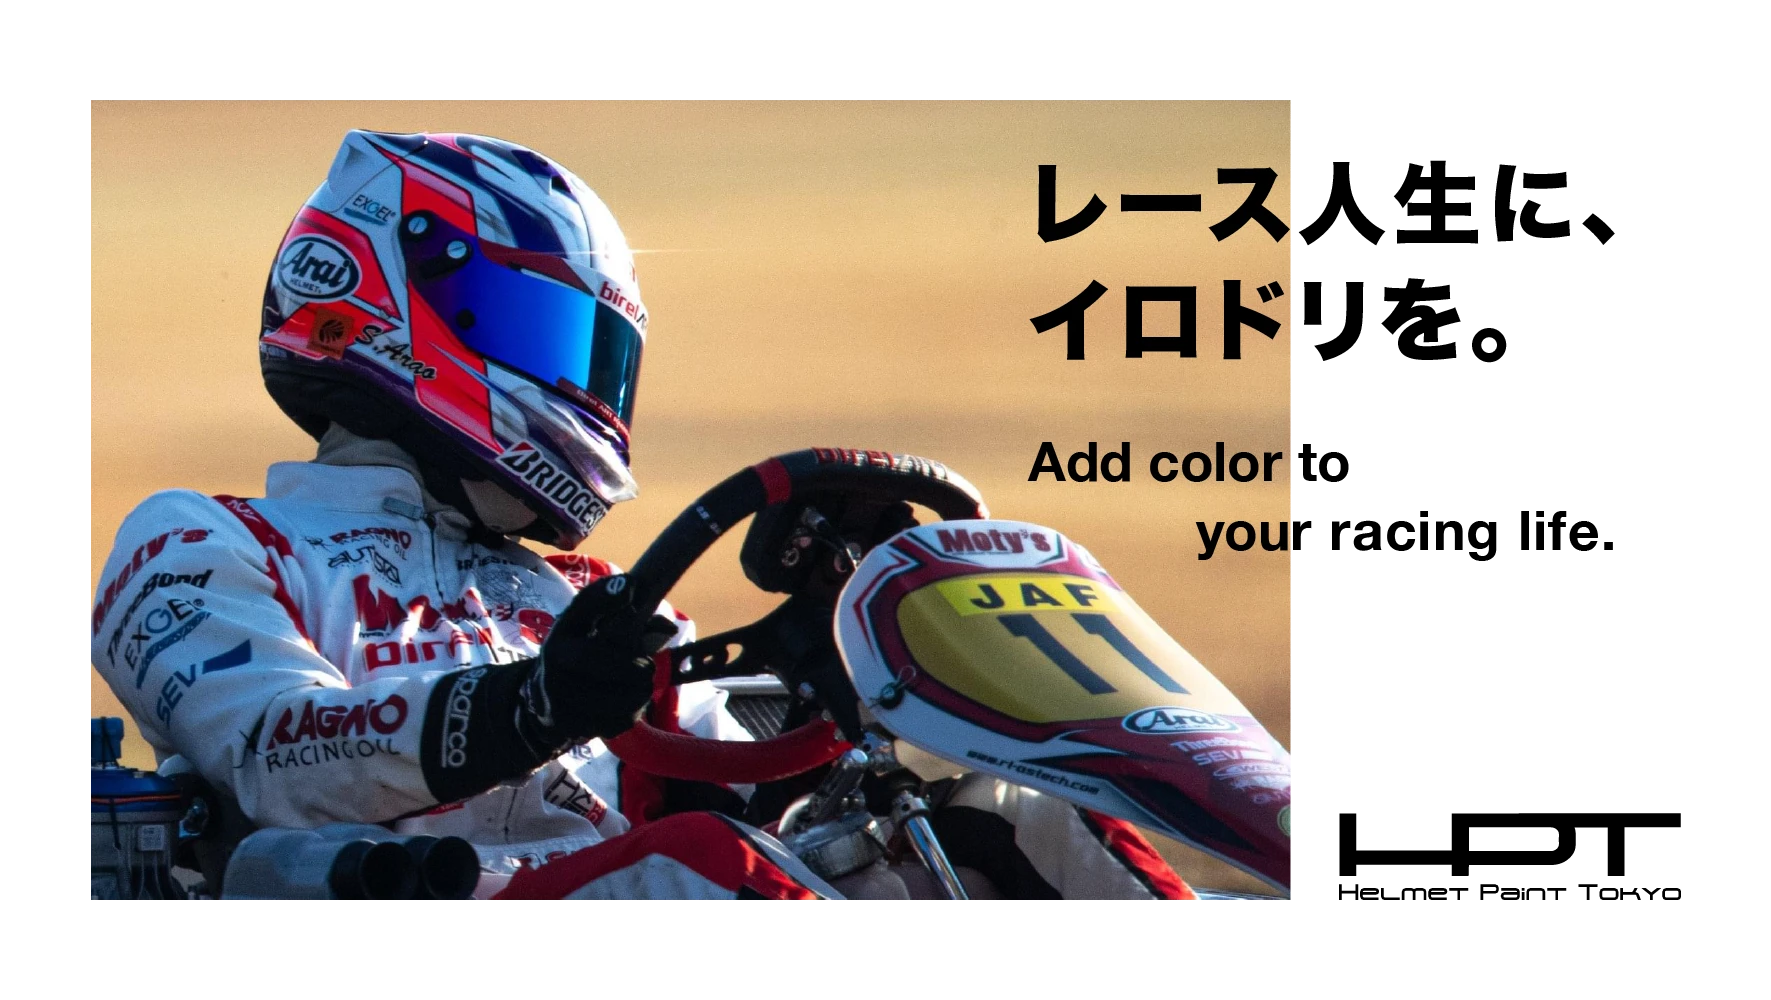 Add color to your racing life. レース人生に、イロドリを。